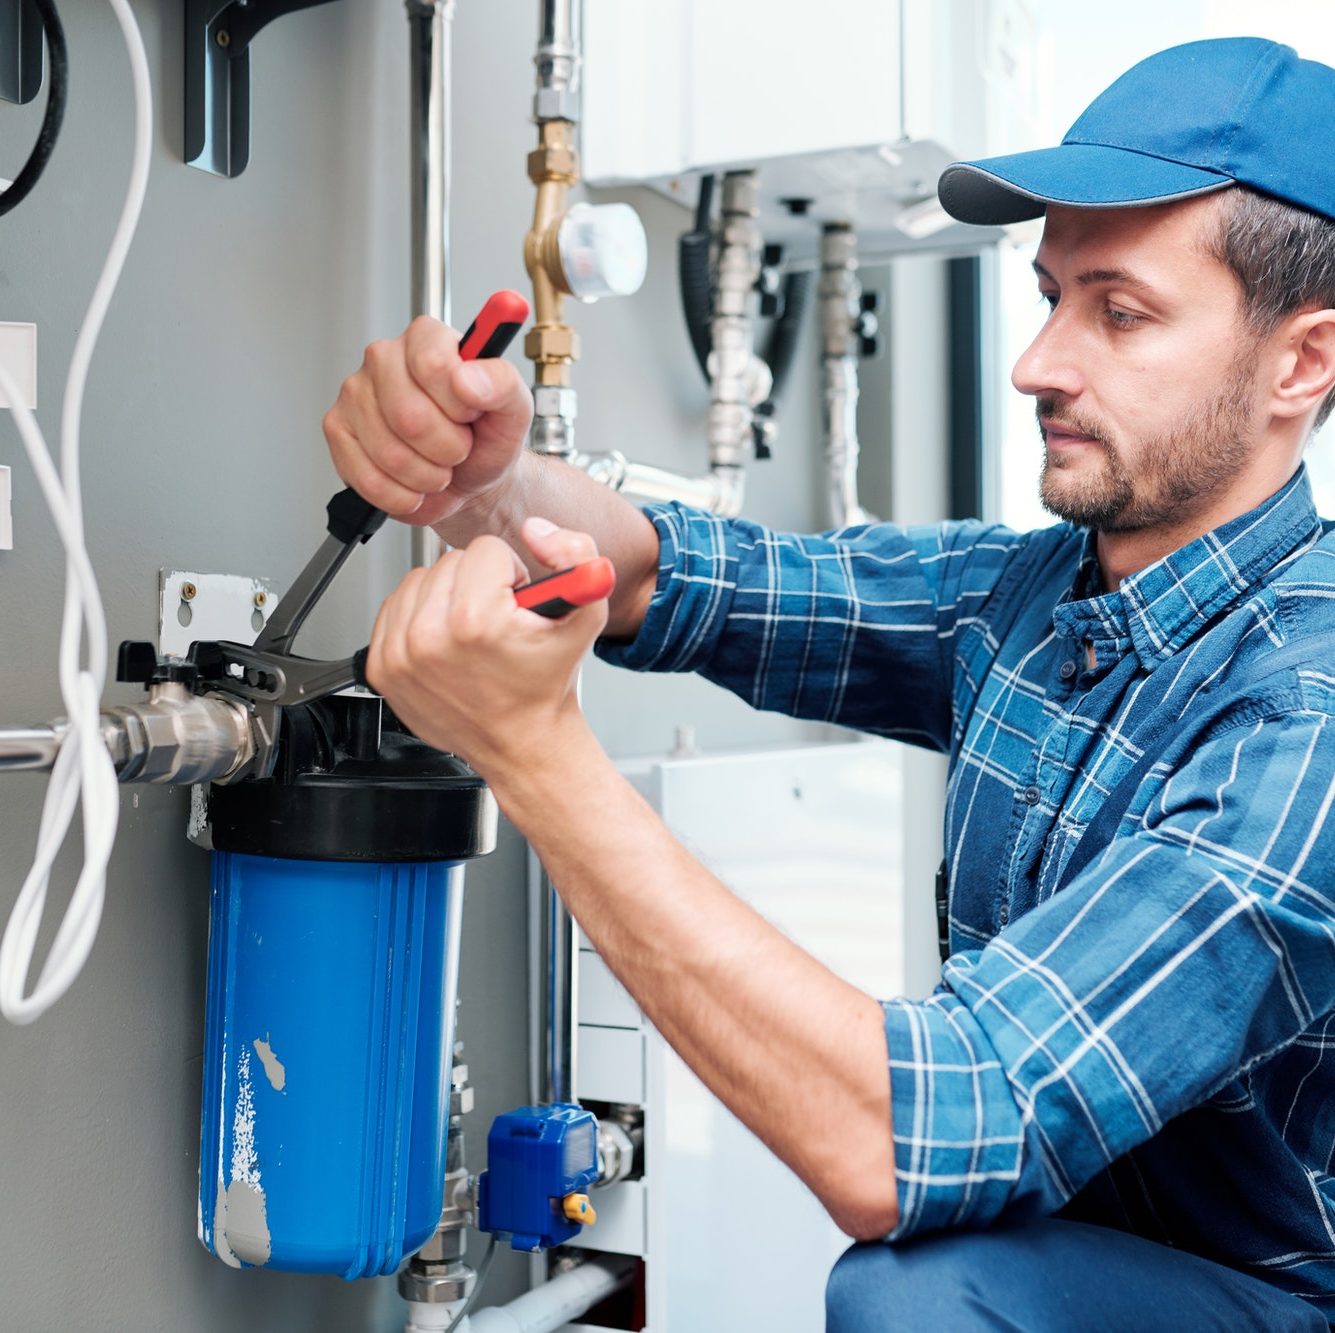 young plumber or technician installing or repairing system of water filtration e1671012139728